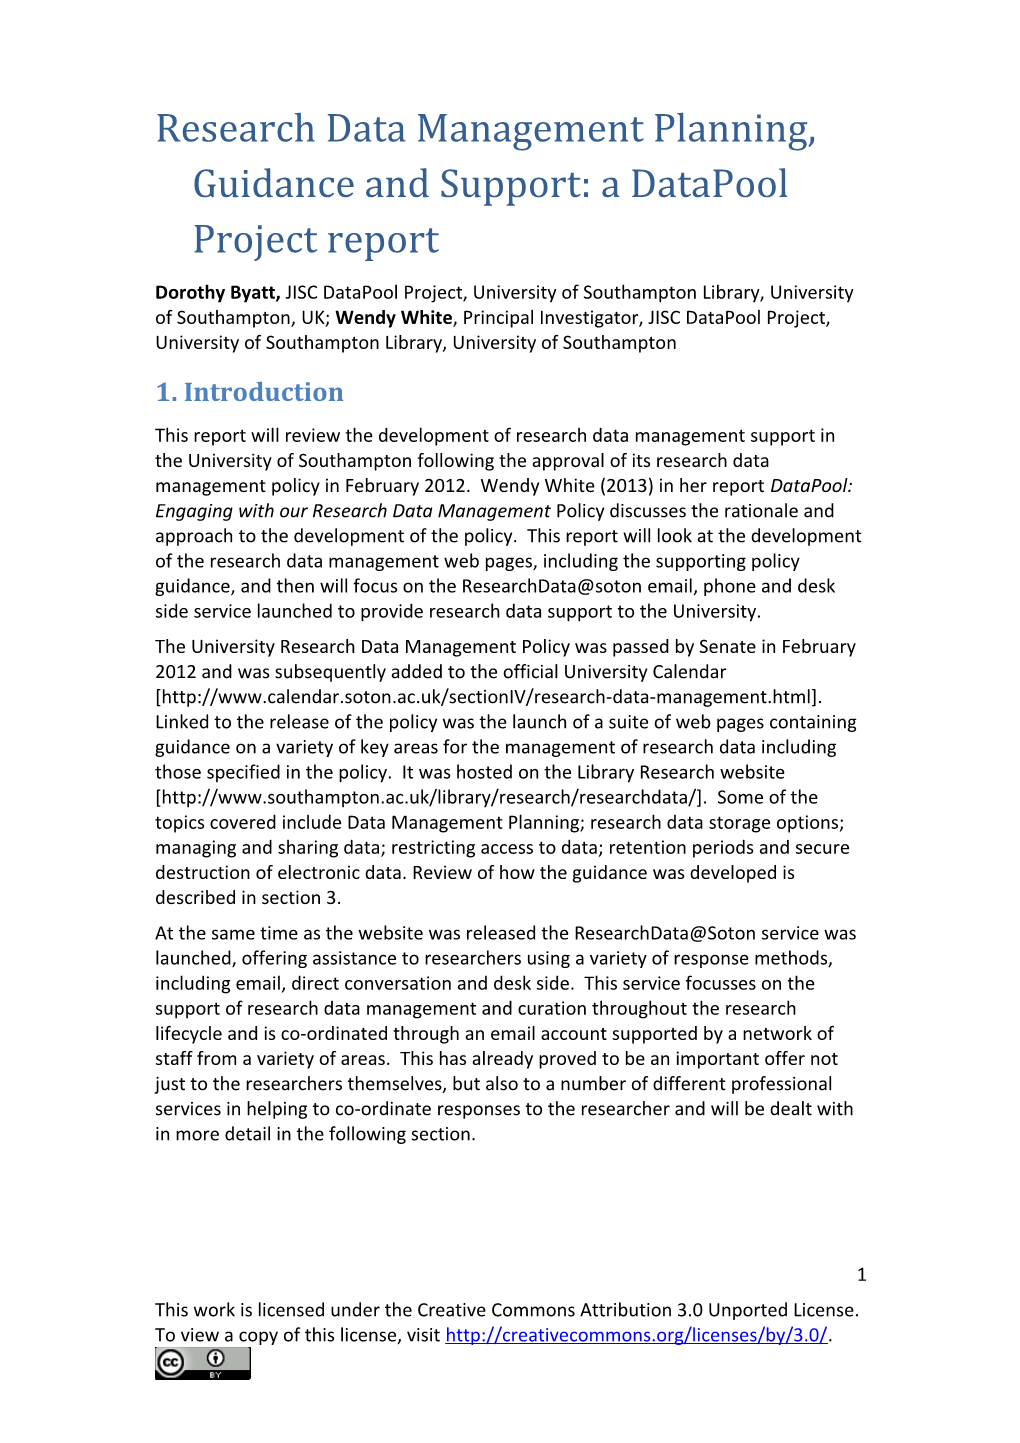 Research Data Management Planning, Guidance and Support: a Datapool Project Report